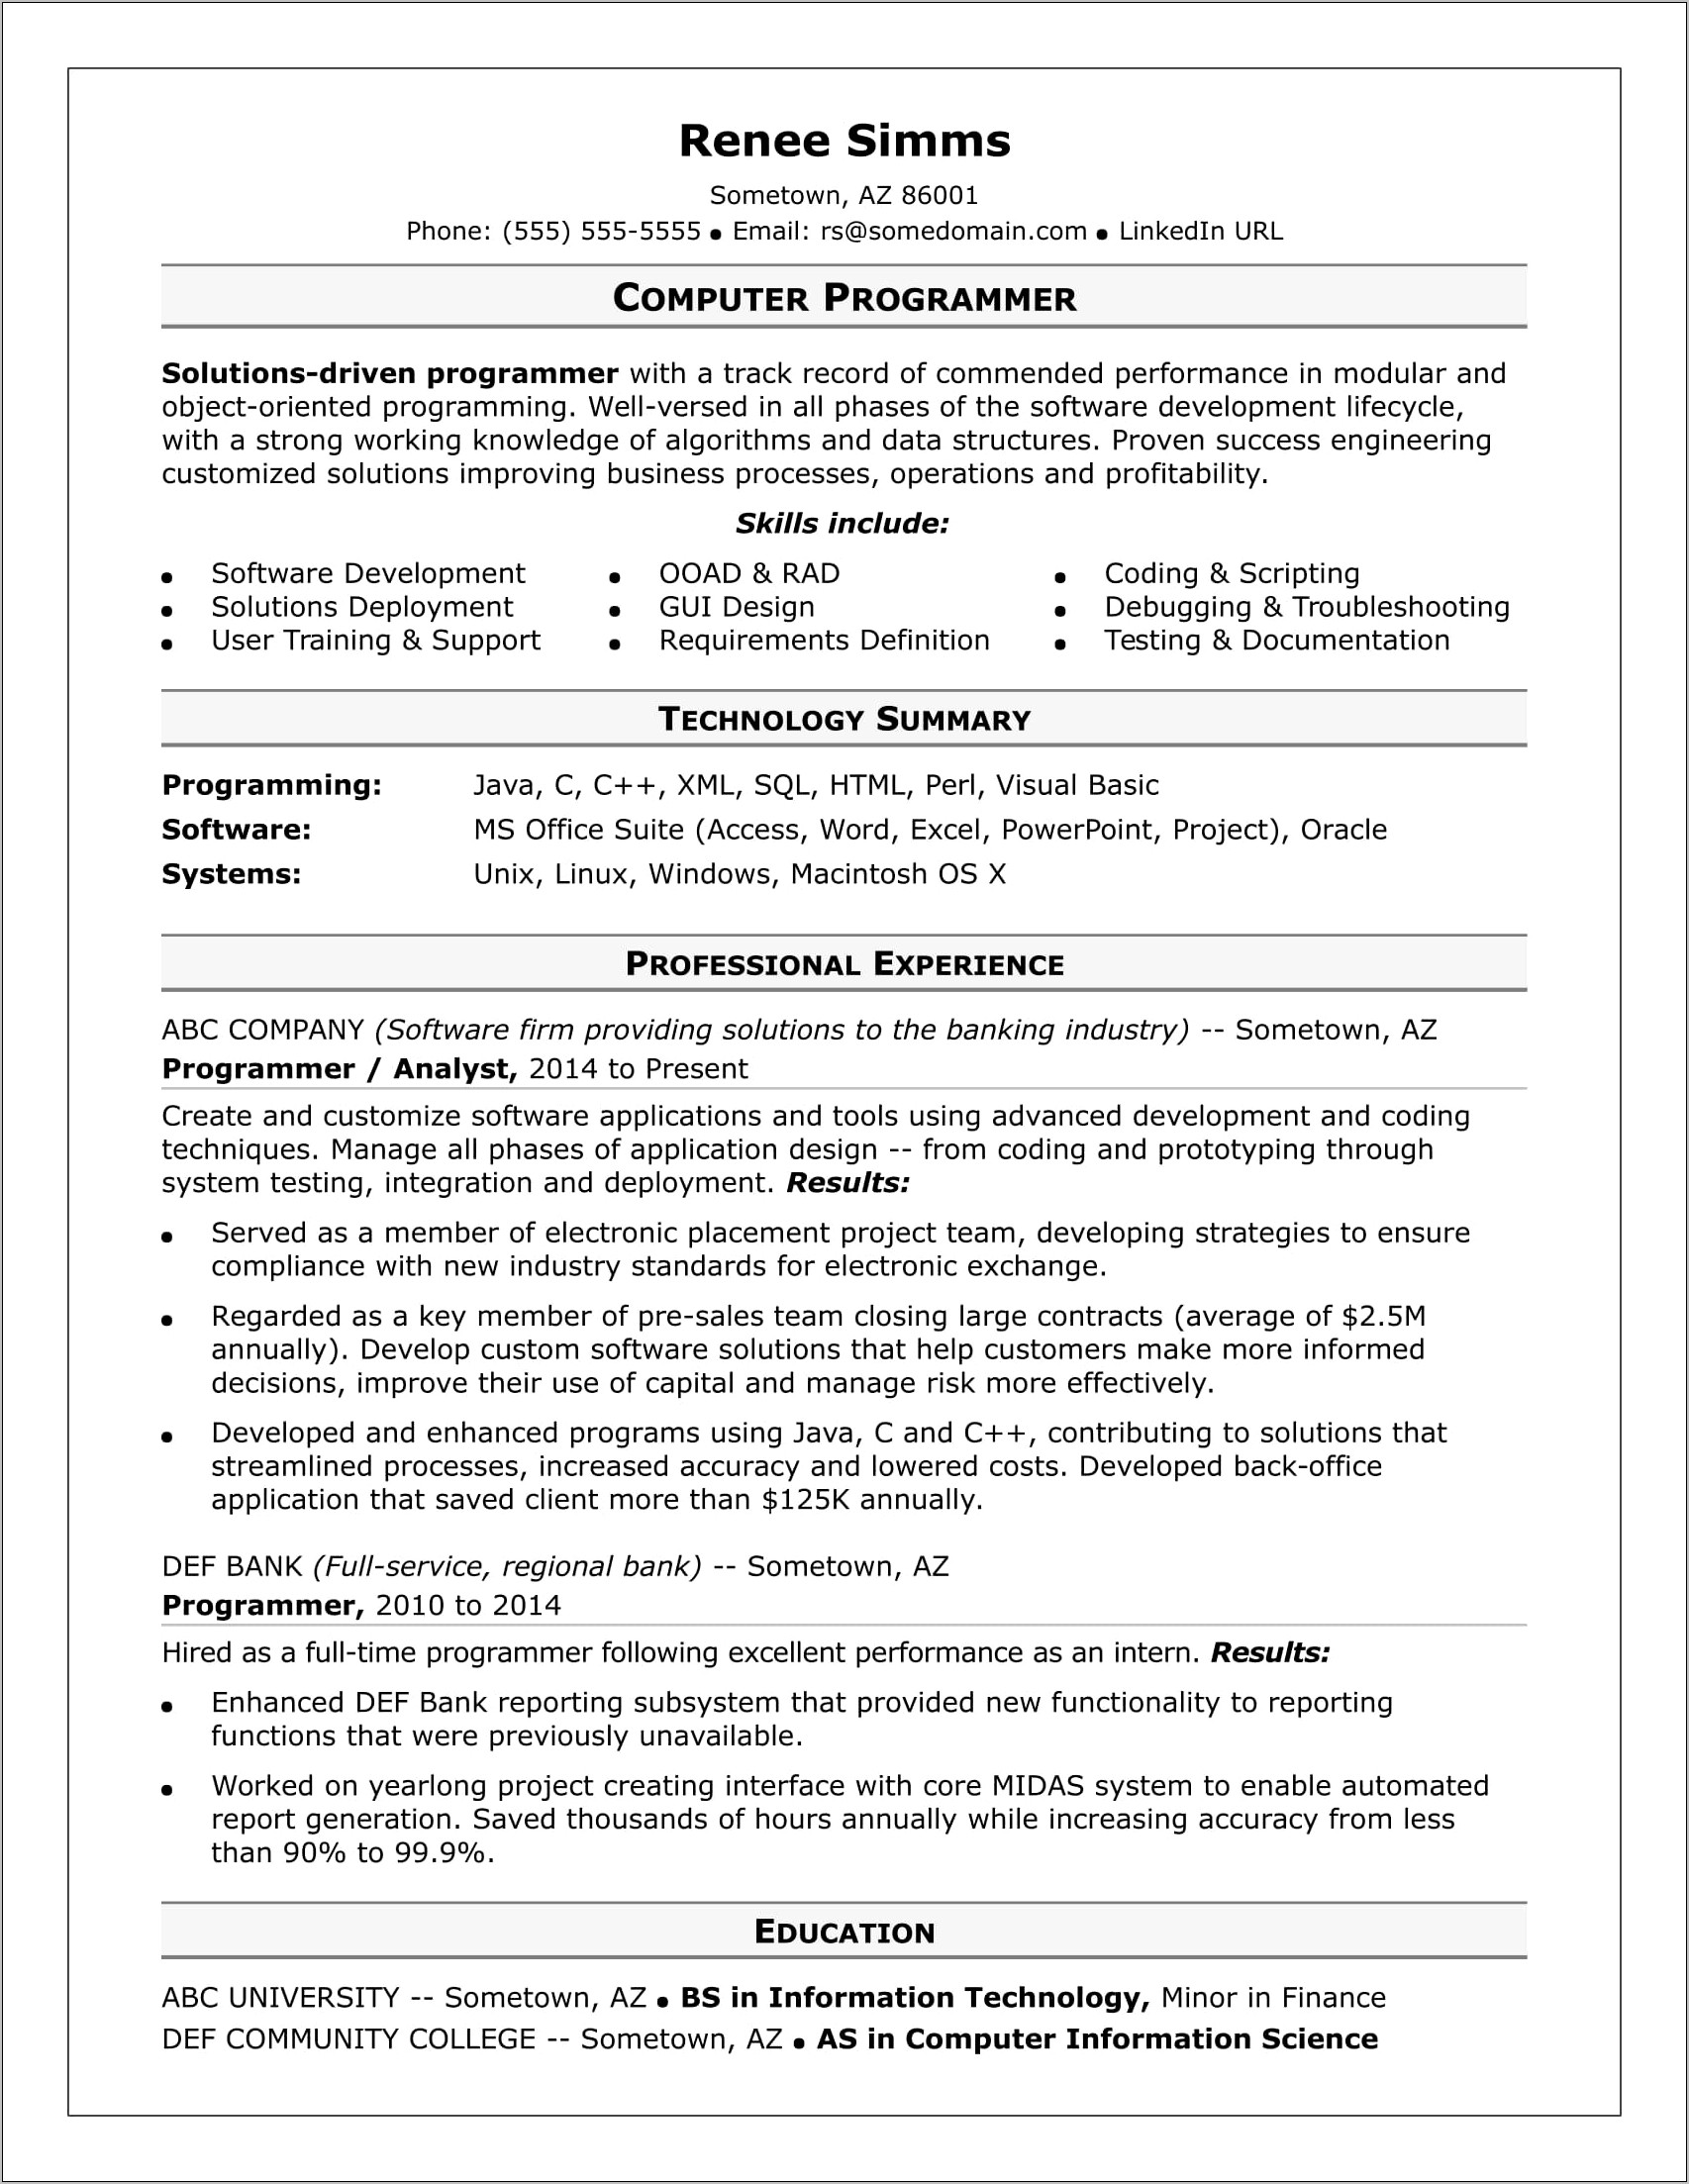 Resume Summary Points For Information Technology